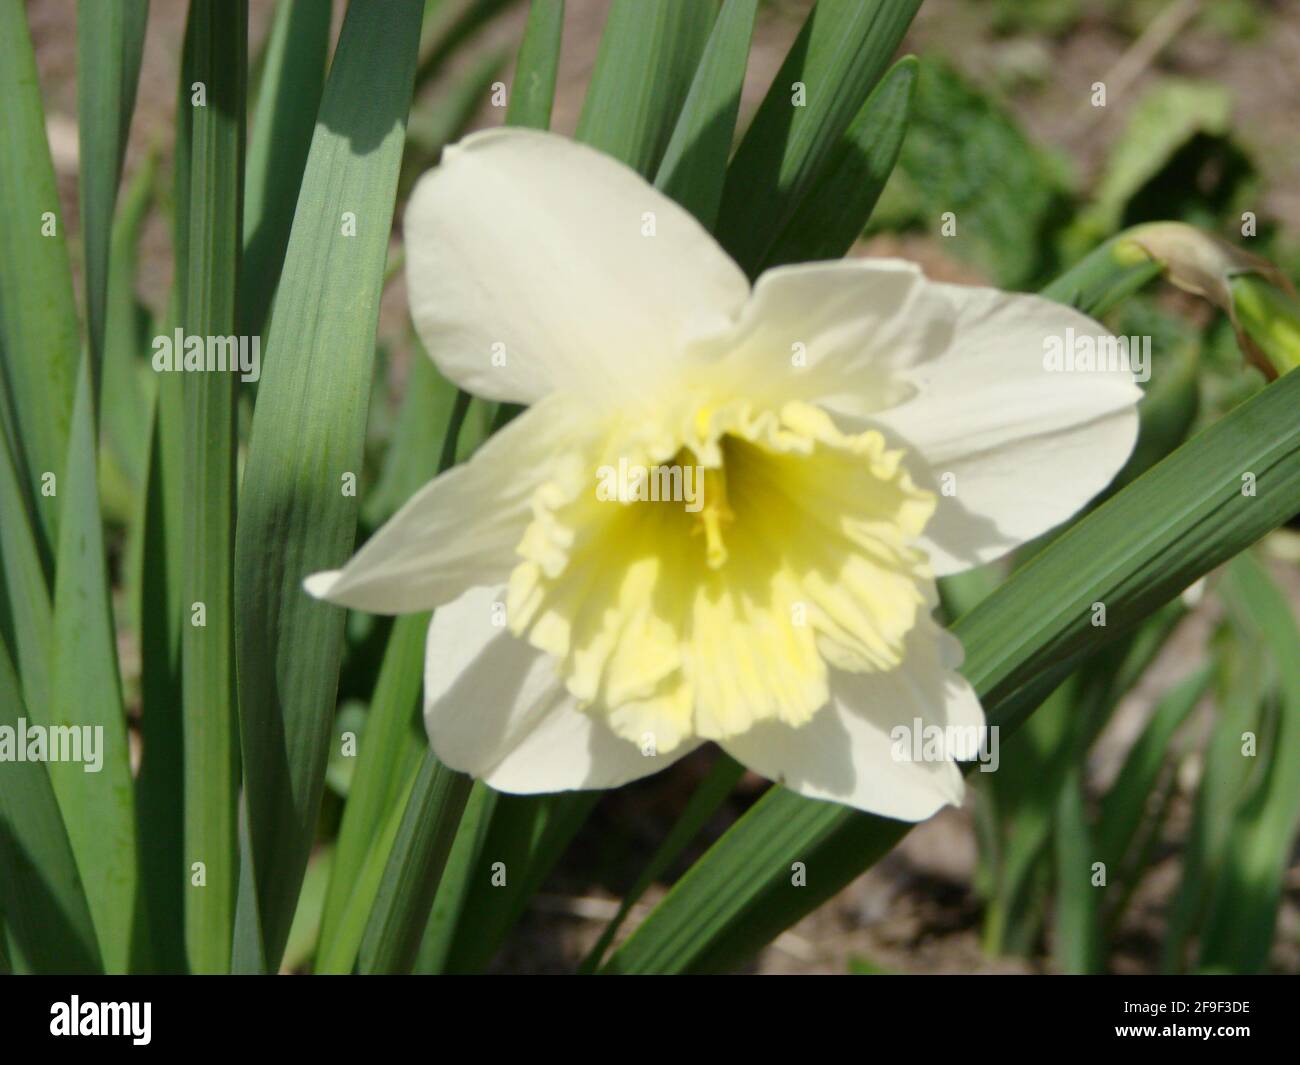 Narcissus flowers flower bed with drift yellow. White double daffodil flowers narcissi daffodils. Narcissus flower also known as daffodil, daffadowndi Stock Photo